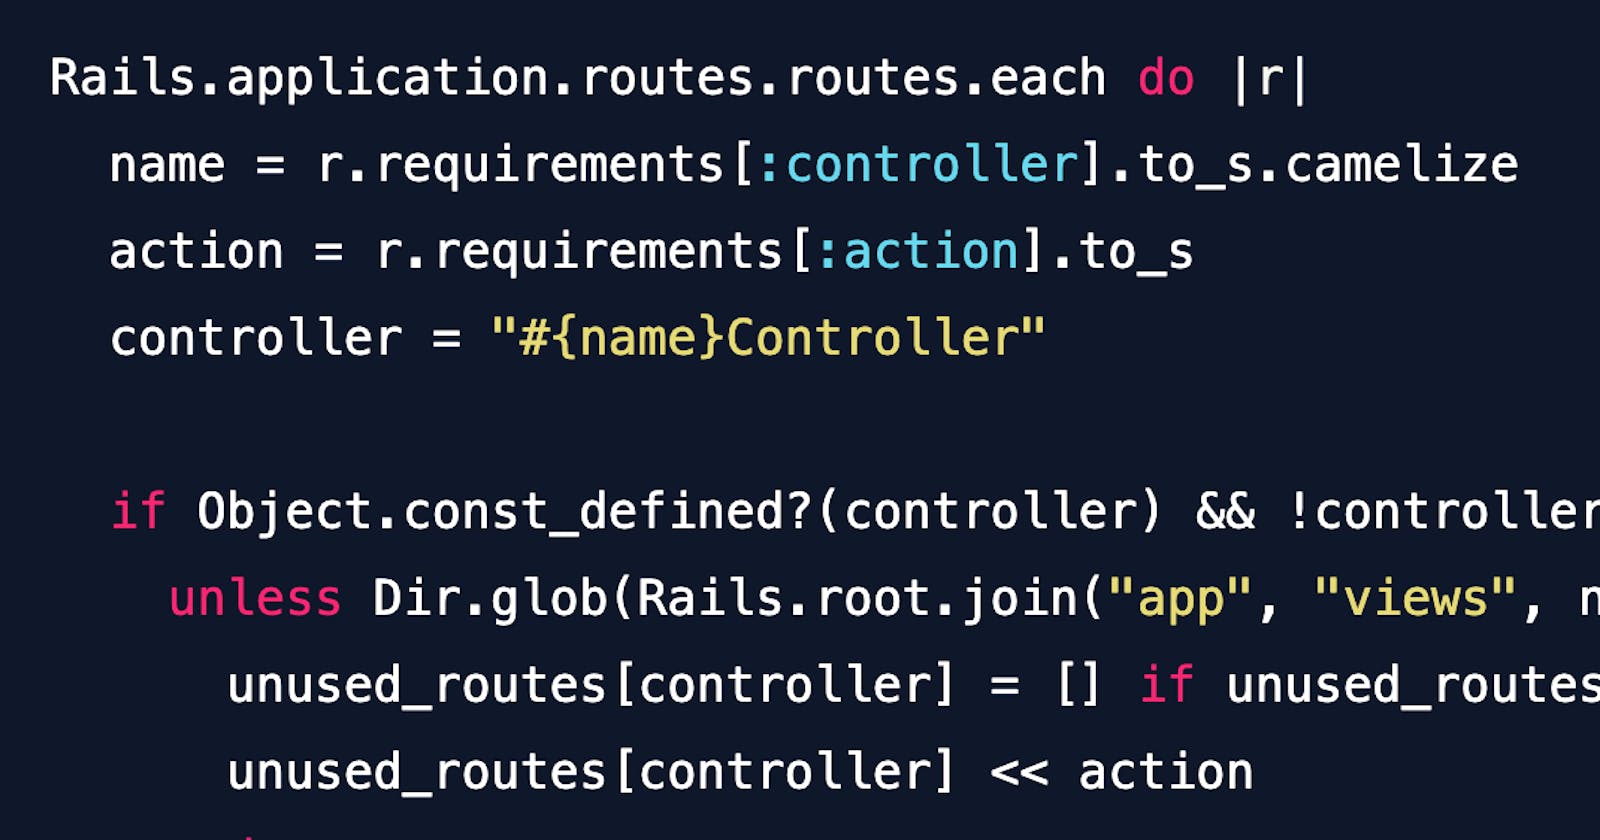 [Quicky] Unused routes for Rails 7.0 below